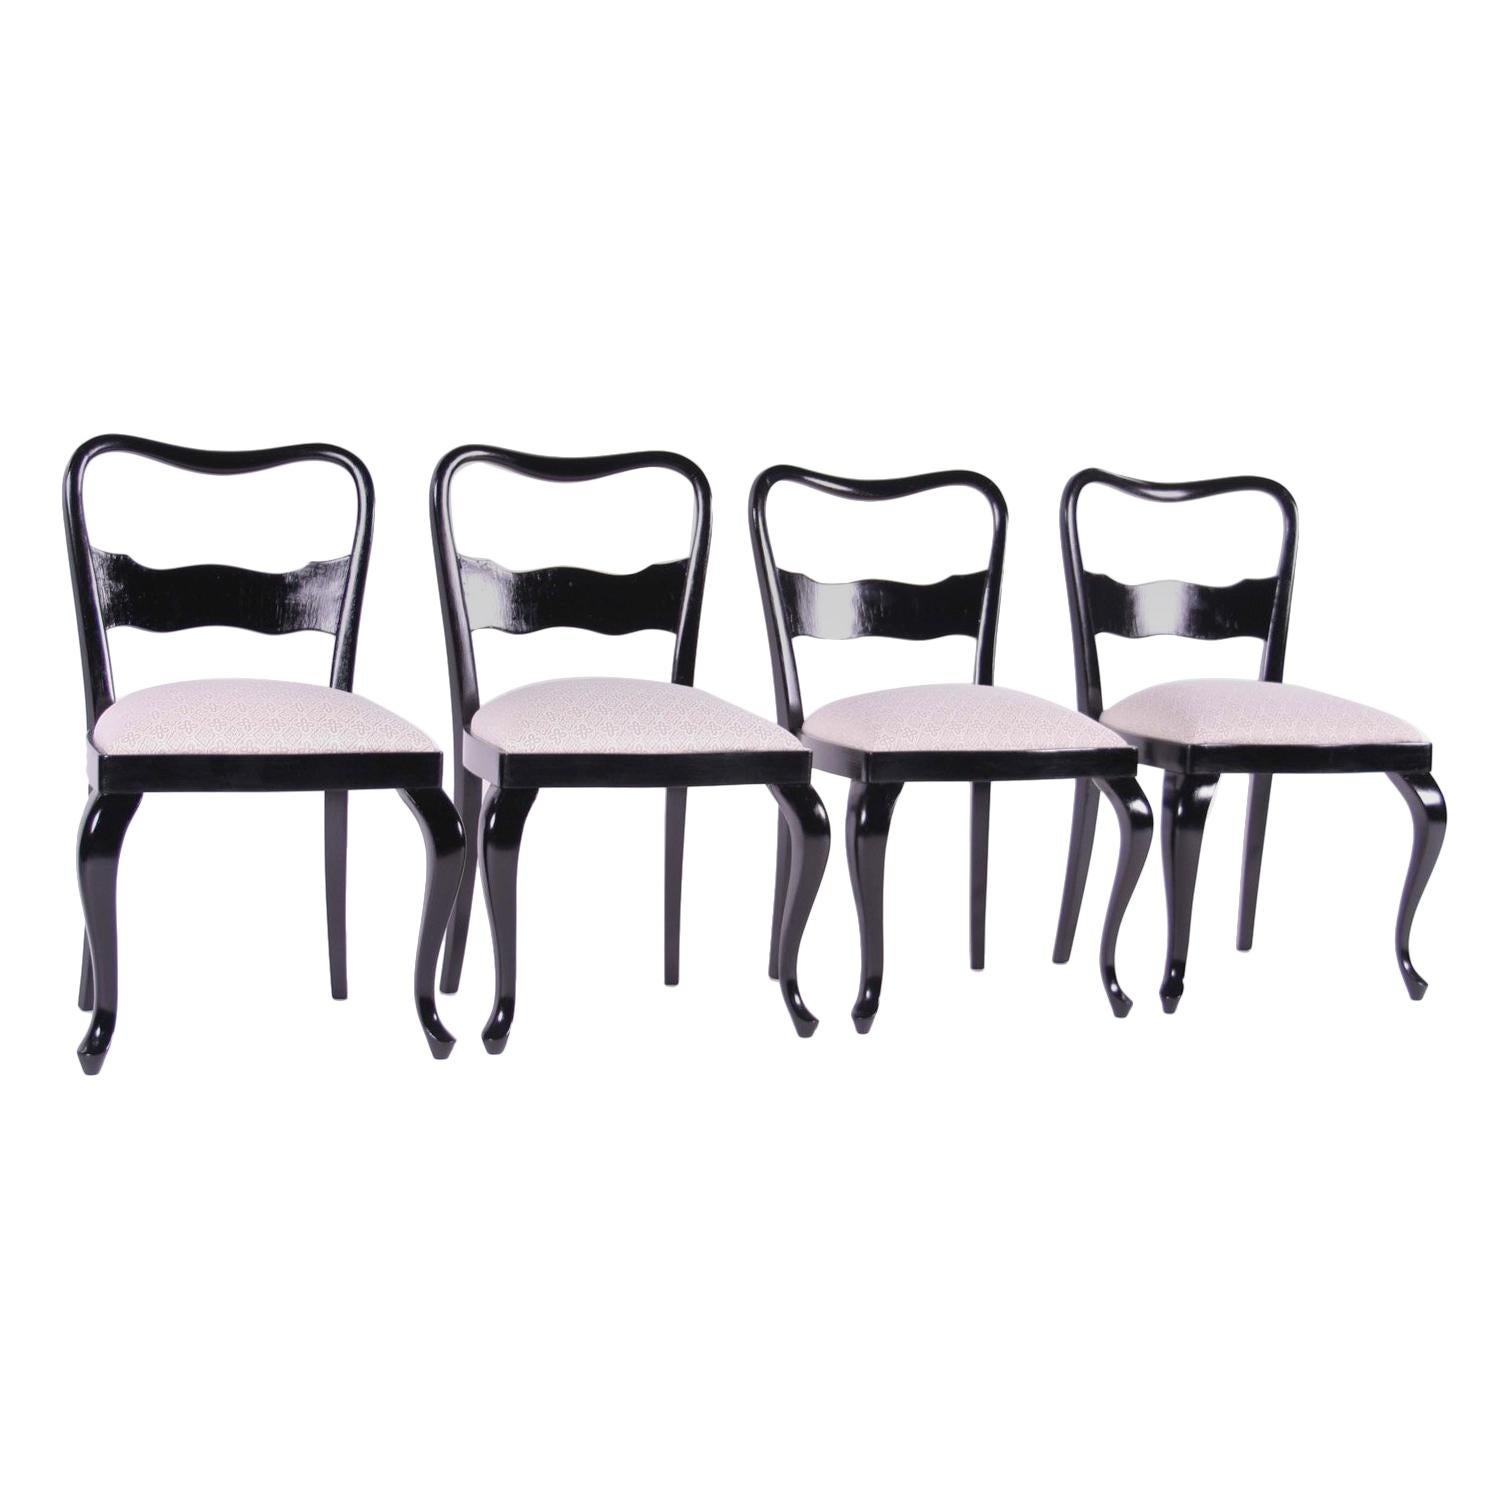 Czech Historism Design Black and White Dining Chairs For Sale